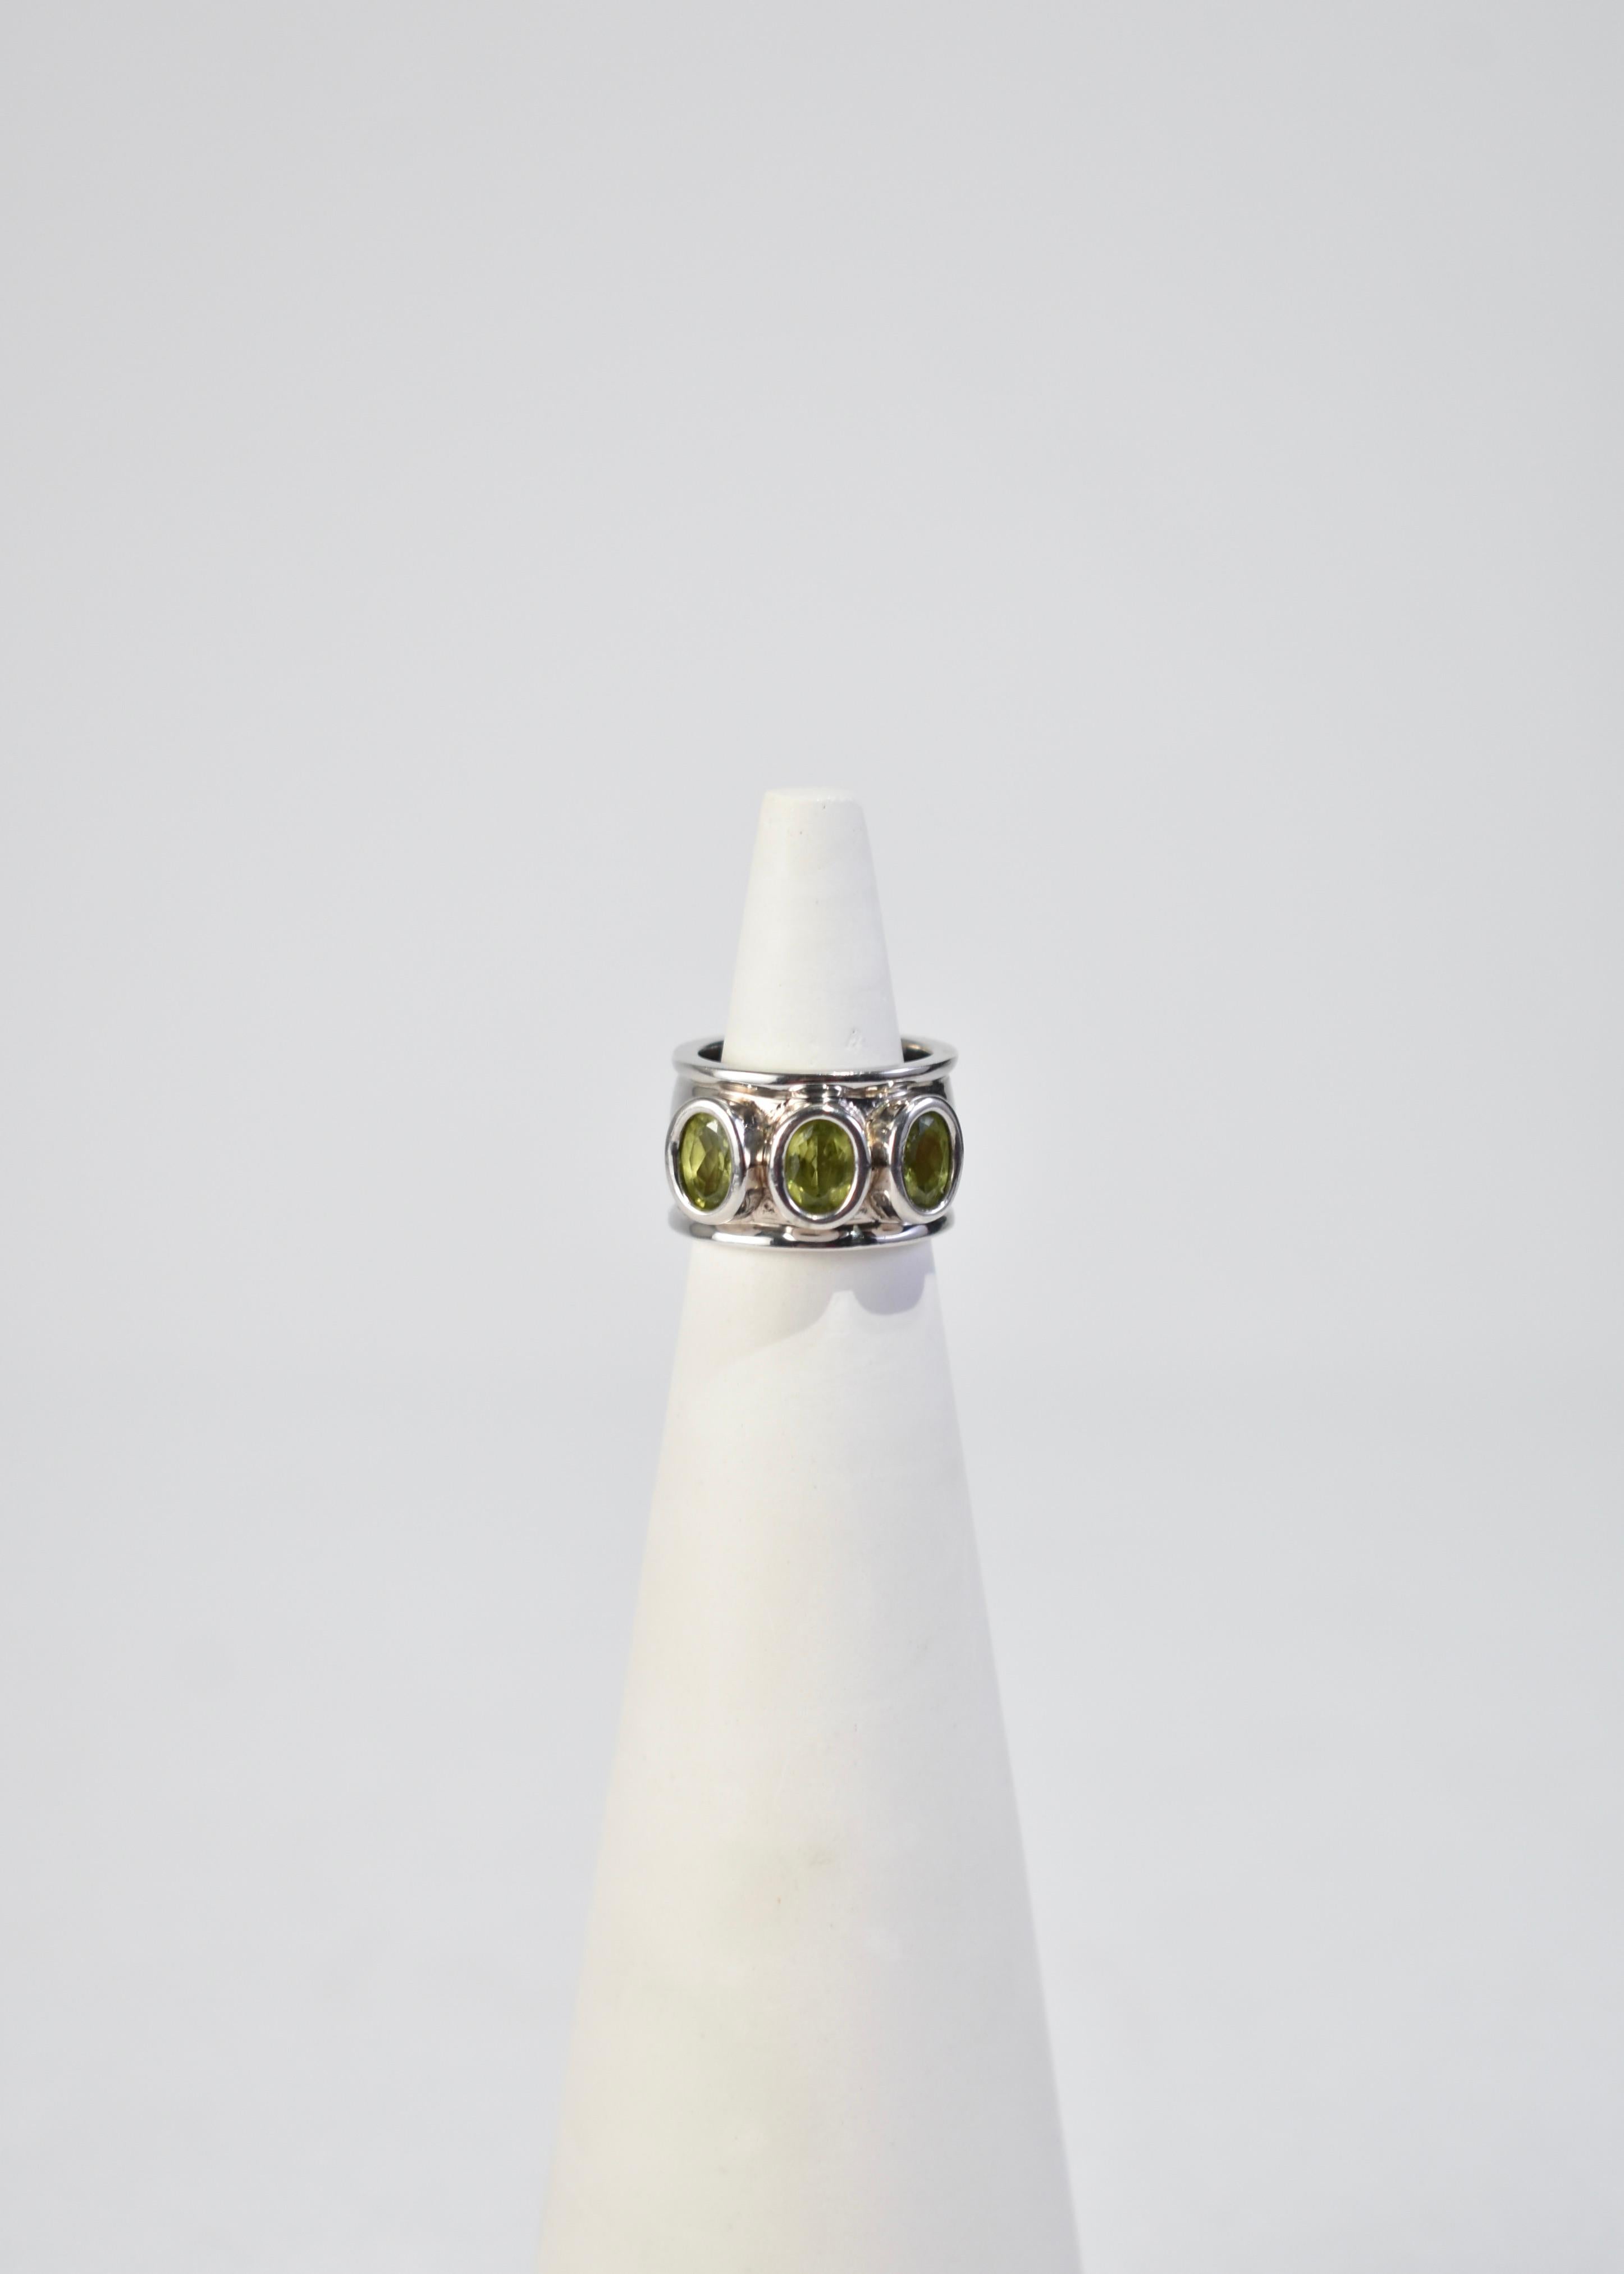 Vintage silver ring with three faceted peridot stones, stamped 925.

Material: Sterling silver, peridot.